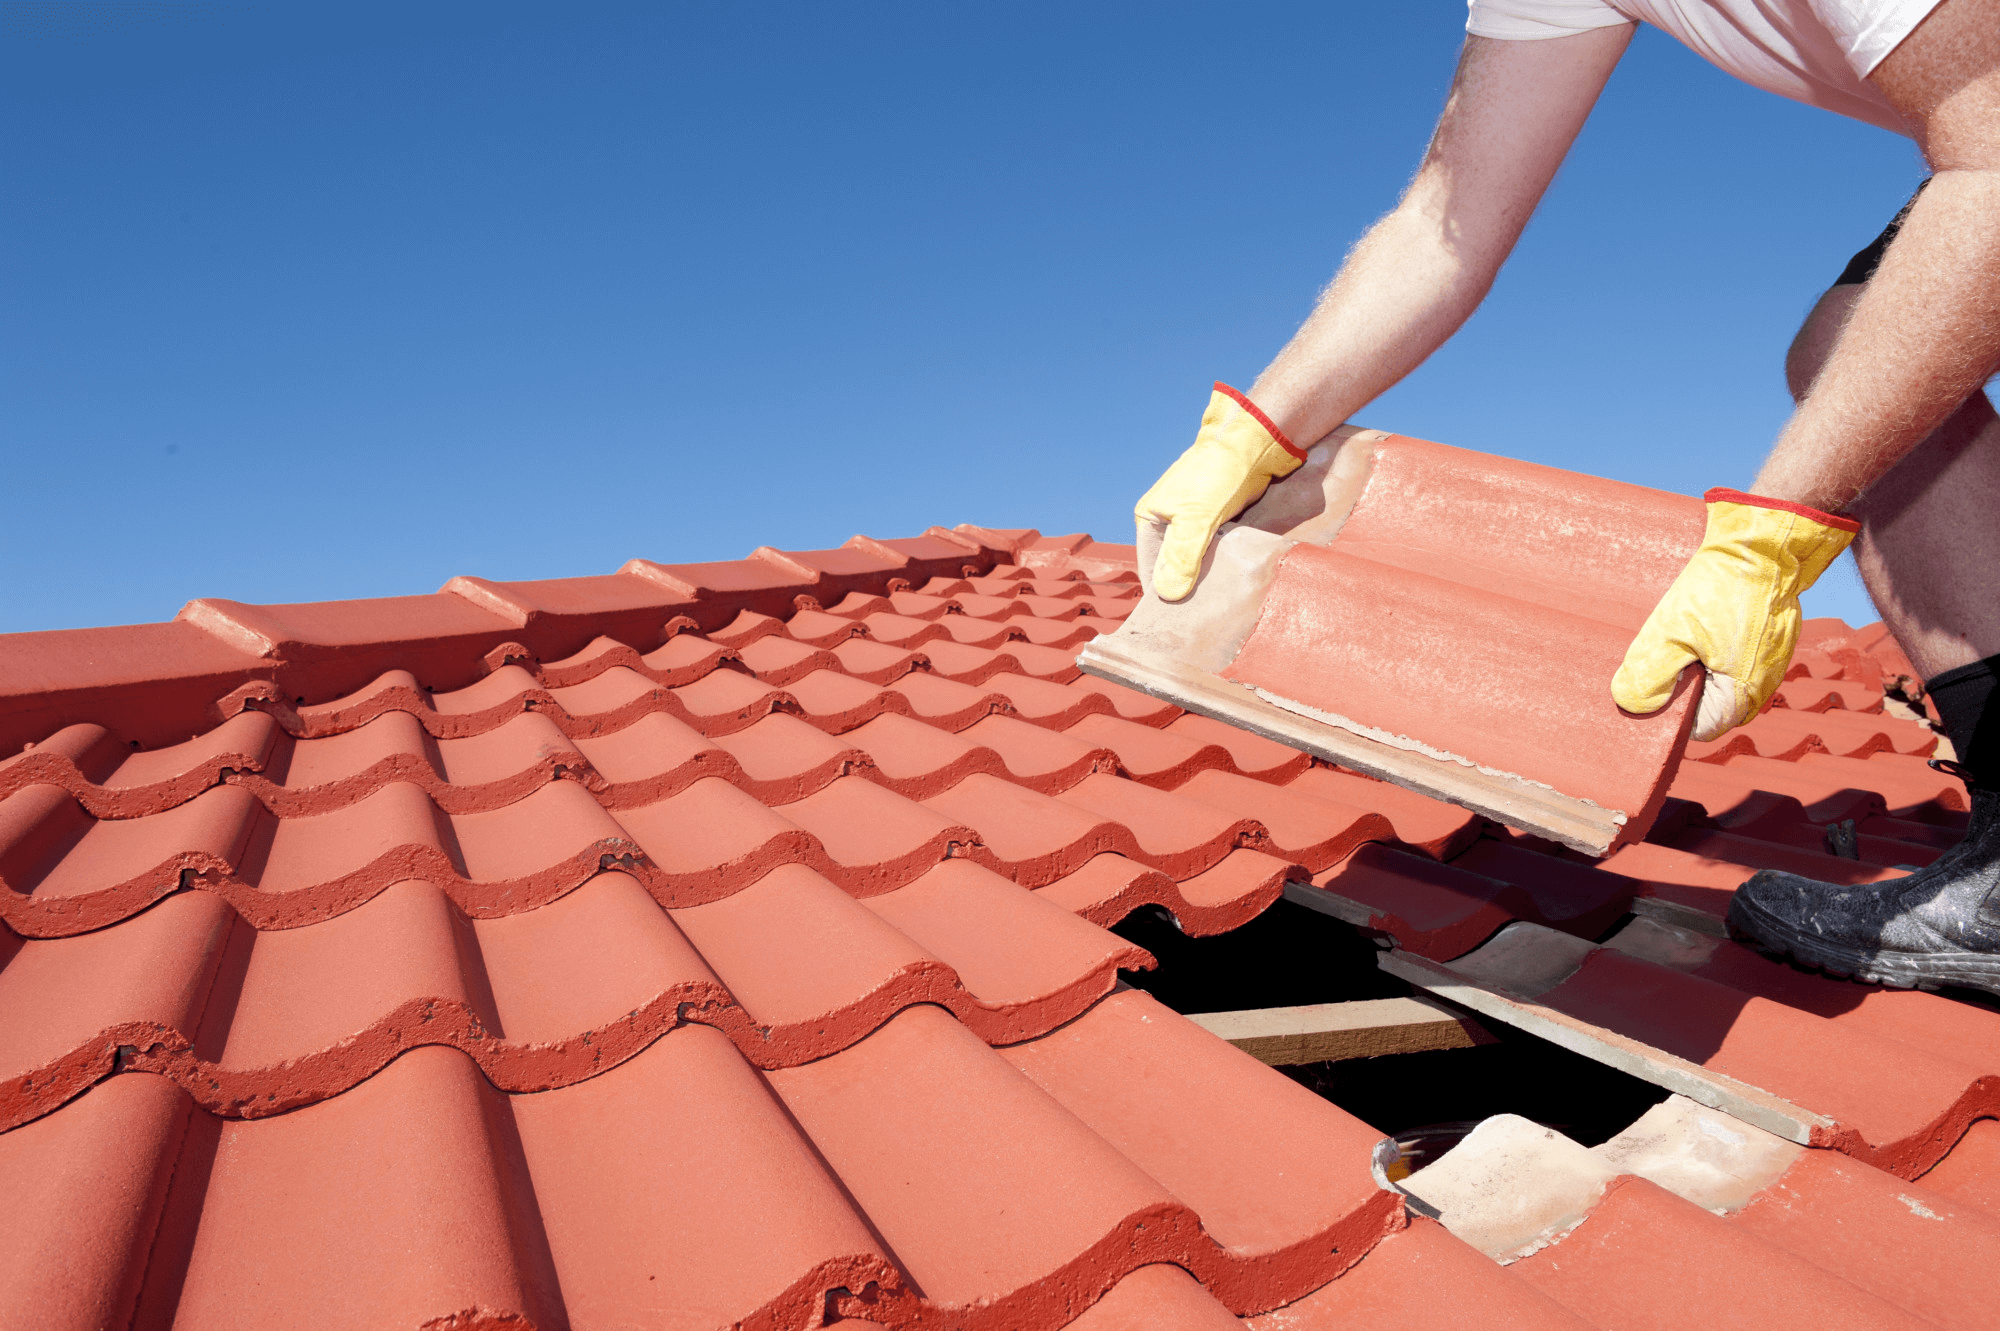 10 Questions To Ask A Roofer Before You Hire Them | JR & Co.